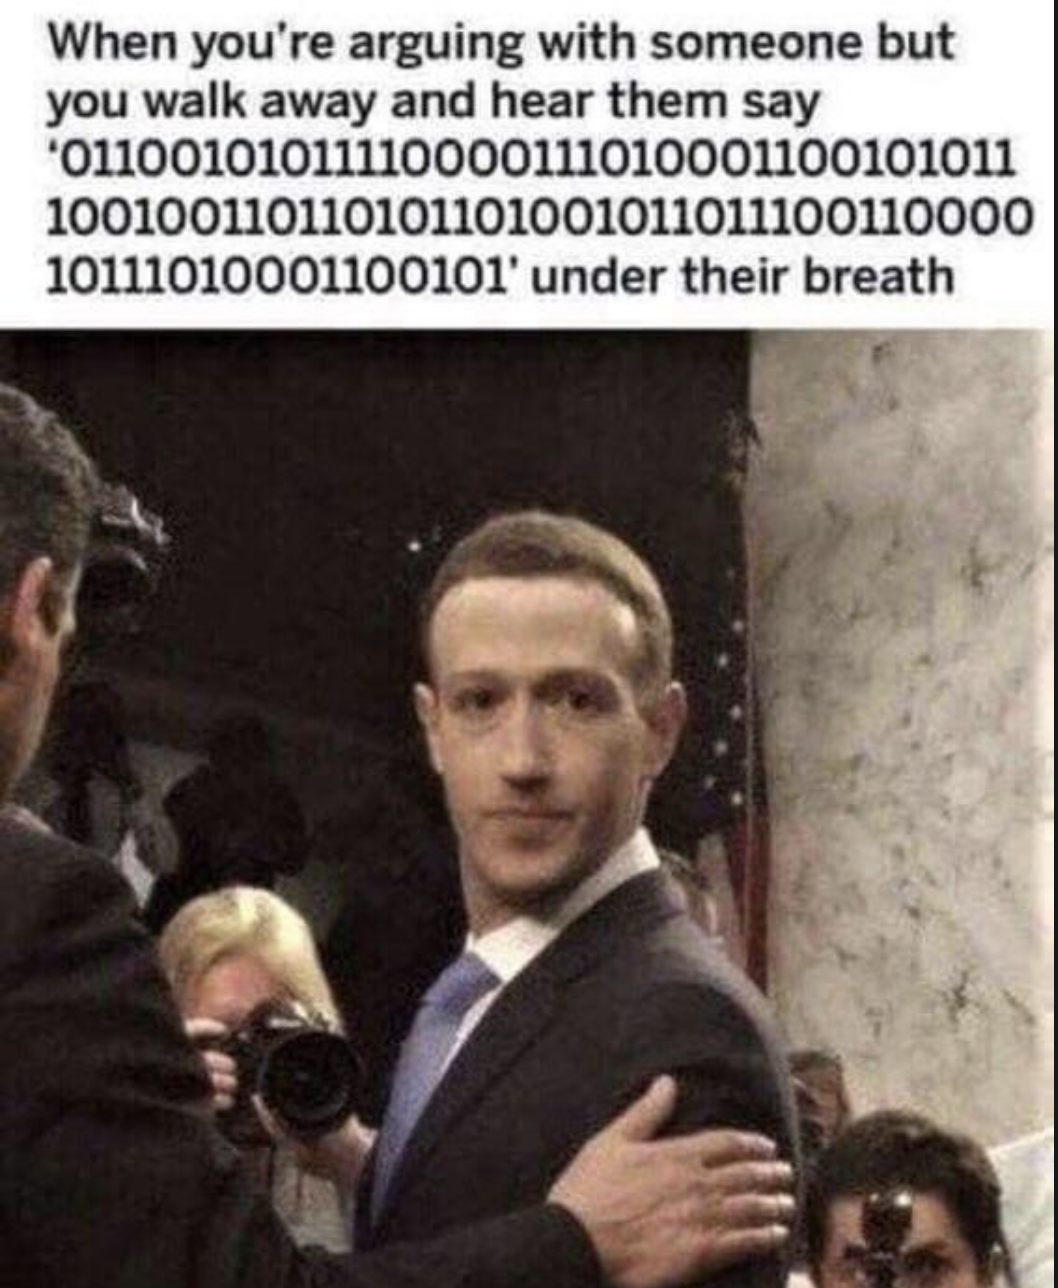 zucc memes - When you're arguing with someone but you walk away and hear them say 01100101011110000111010001100101011 100100110110101101001011011100110000 10111010001100101' under their breath